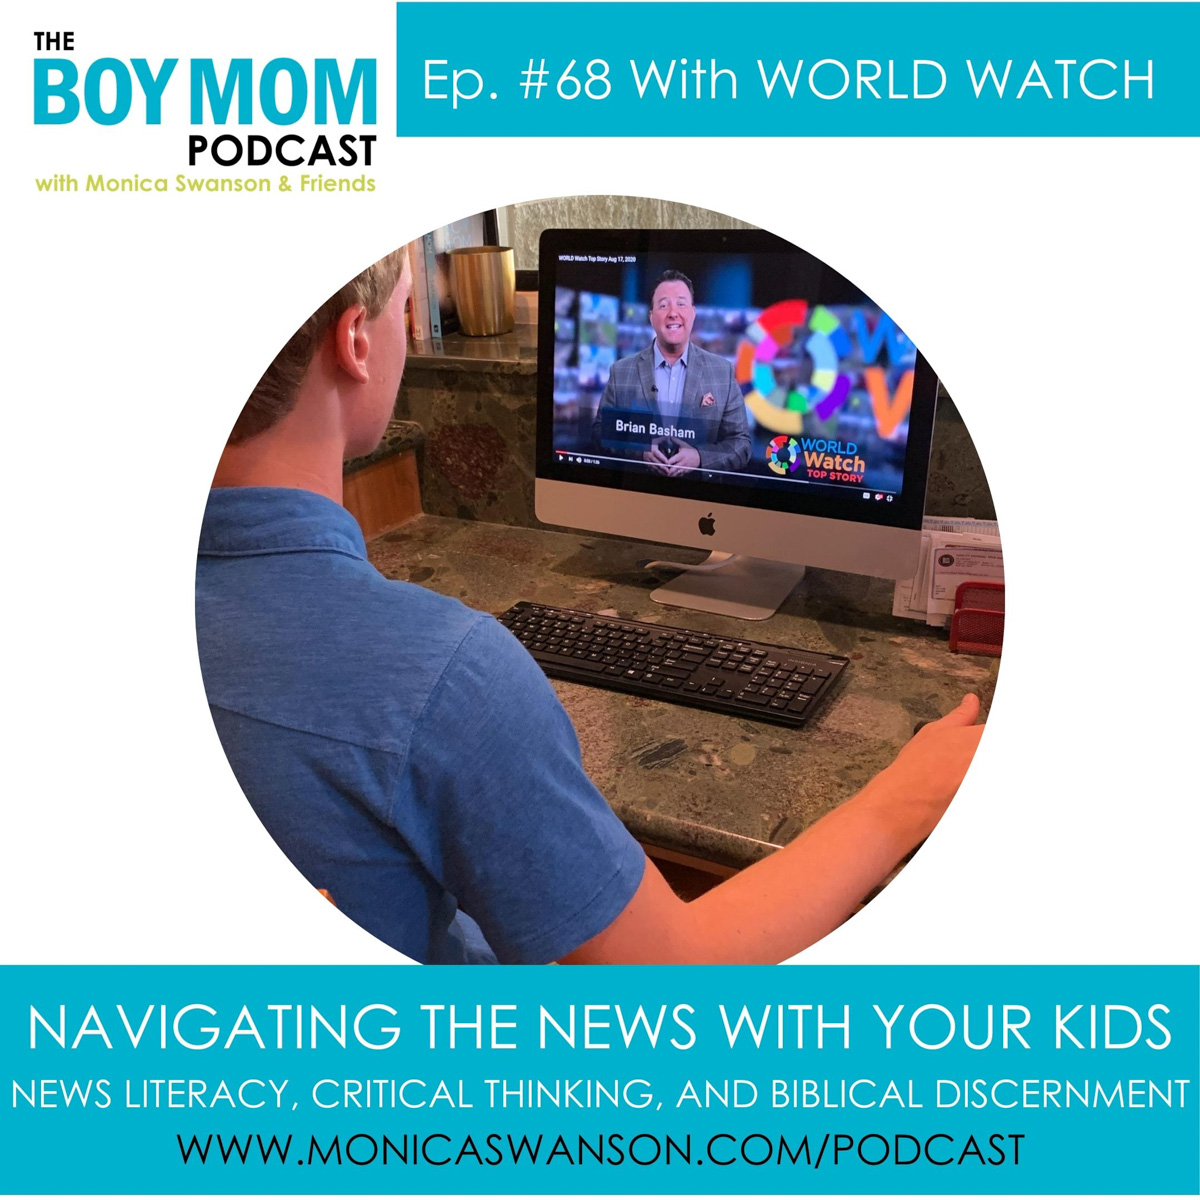 Navigating the News with Your Kids {Episode 68 with World Watch}